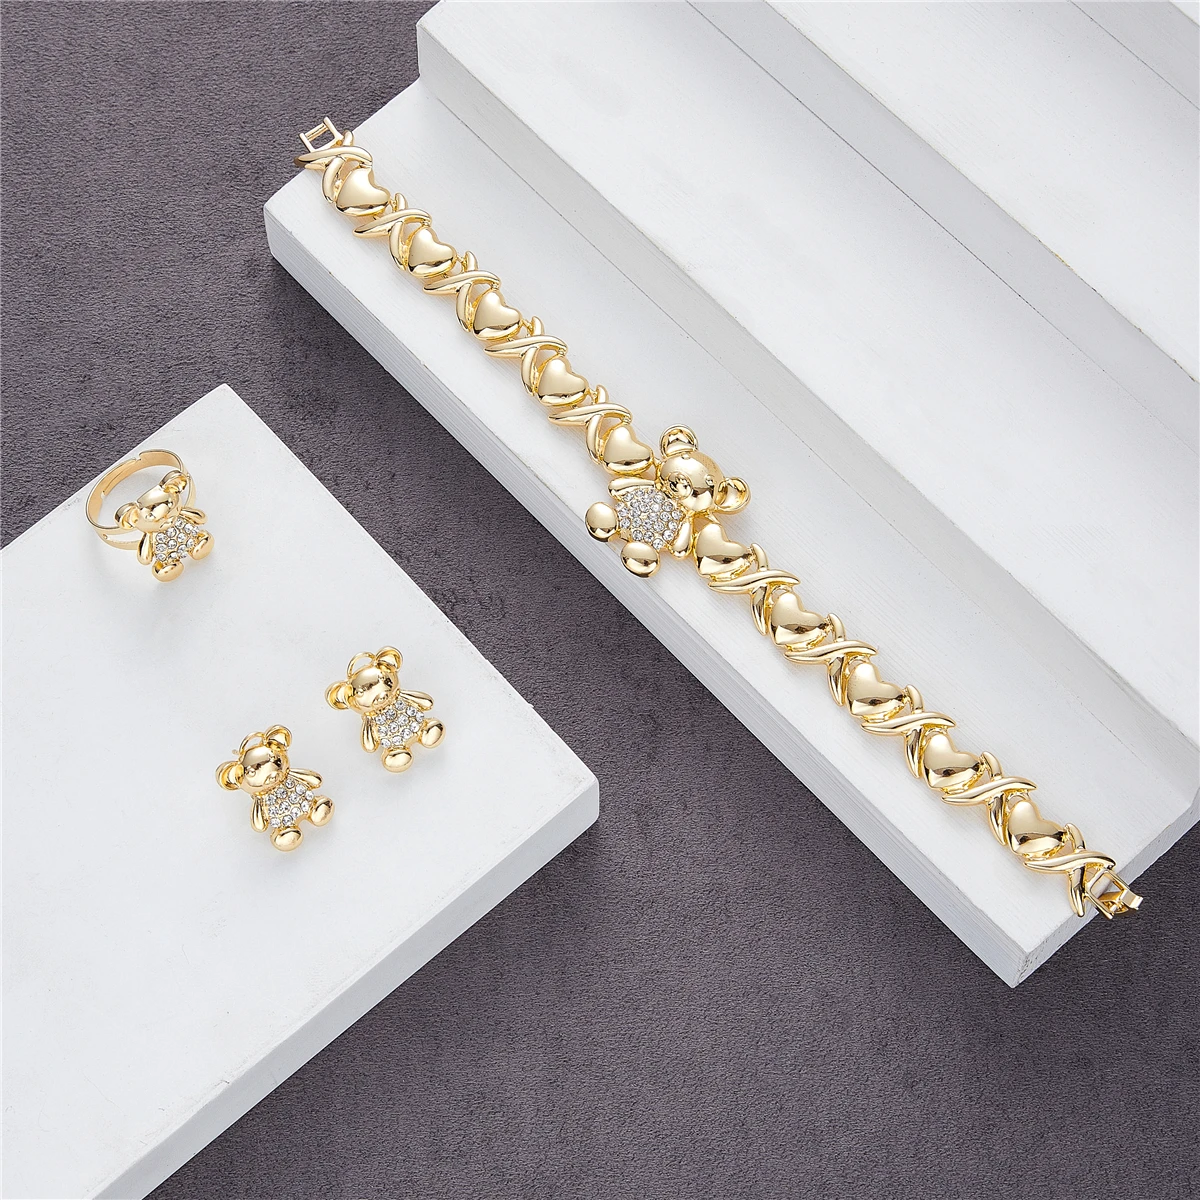 

Africa Nigeria Large Jewelry Set Dubai 14k Gold Plated Women's Wedding Accessories Exquisite Necklace Earrings Ring Set